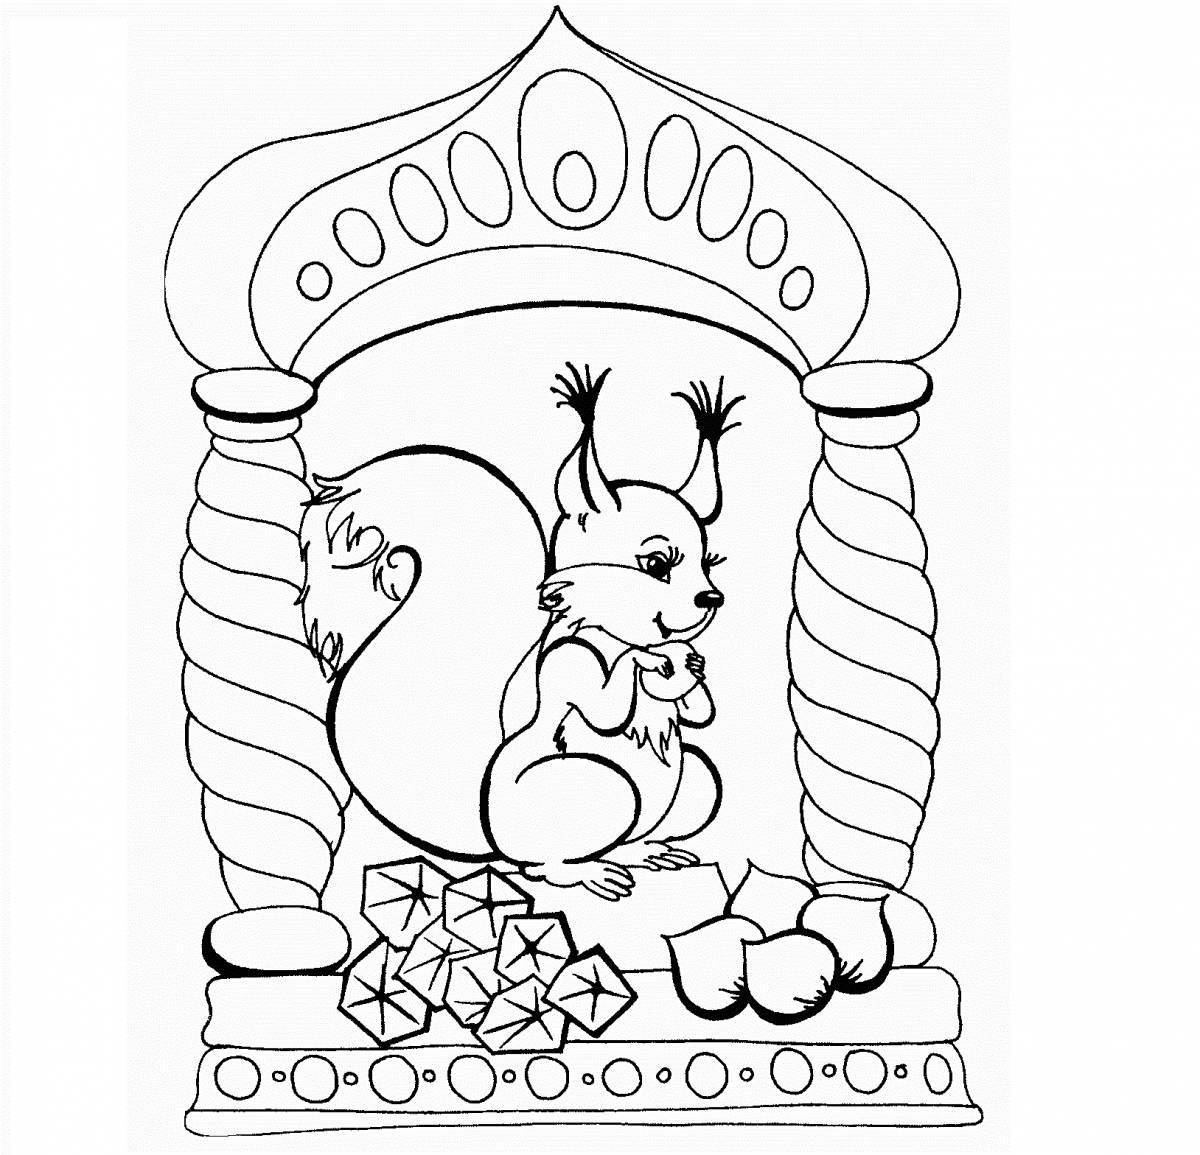 Radiant coloring book for children 4-5 years old based on Pushkin's fairy tales